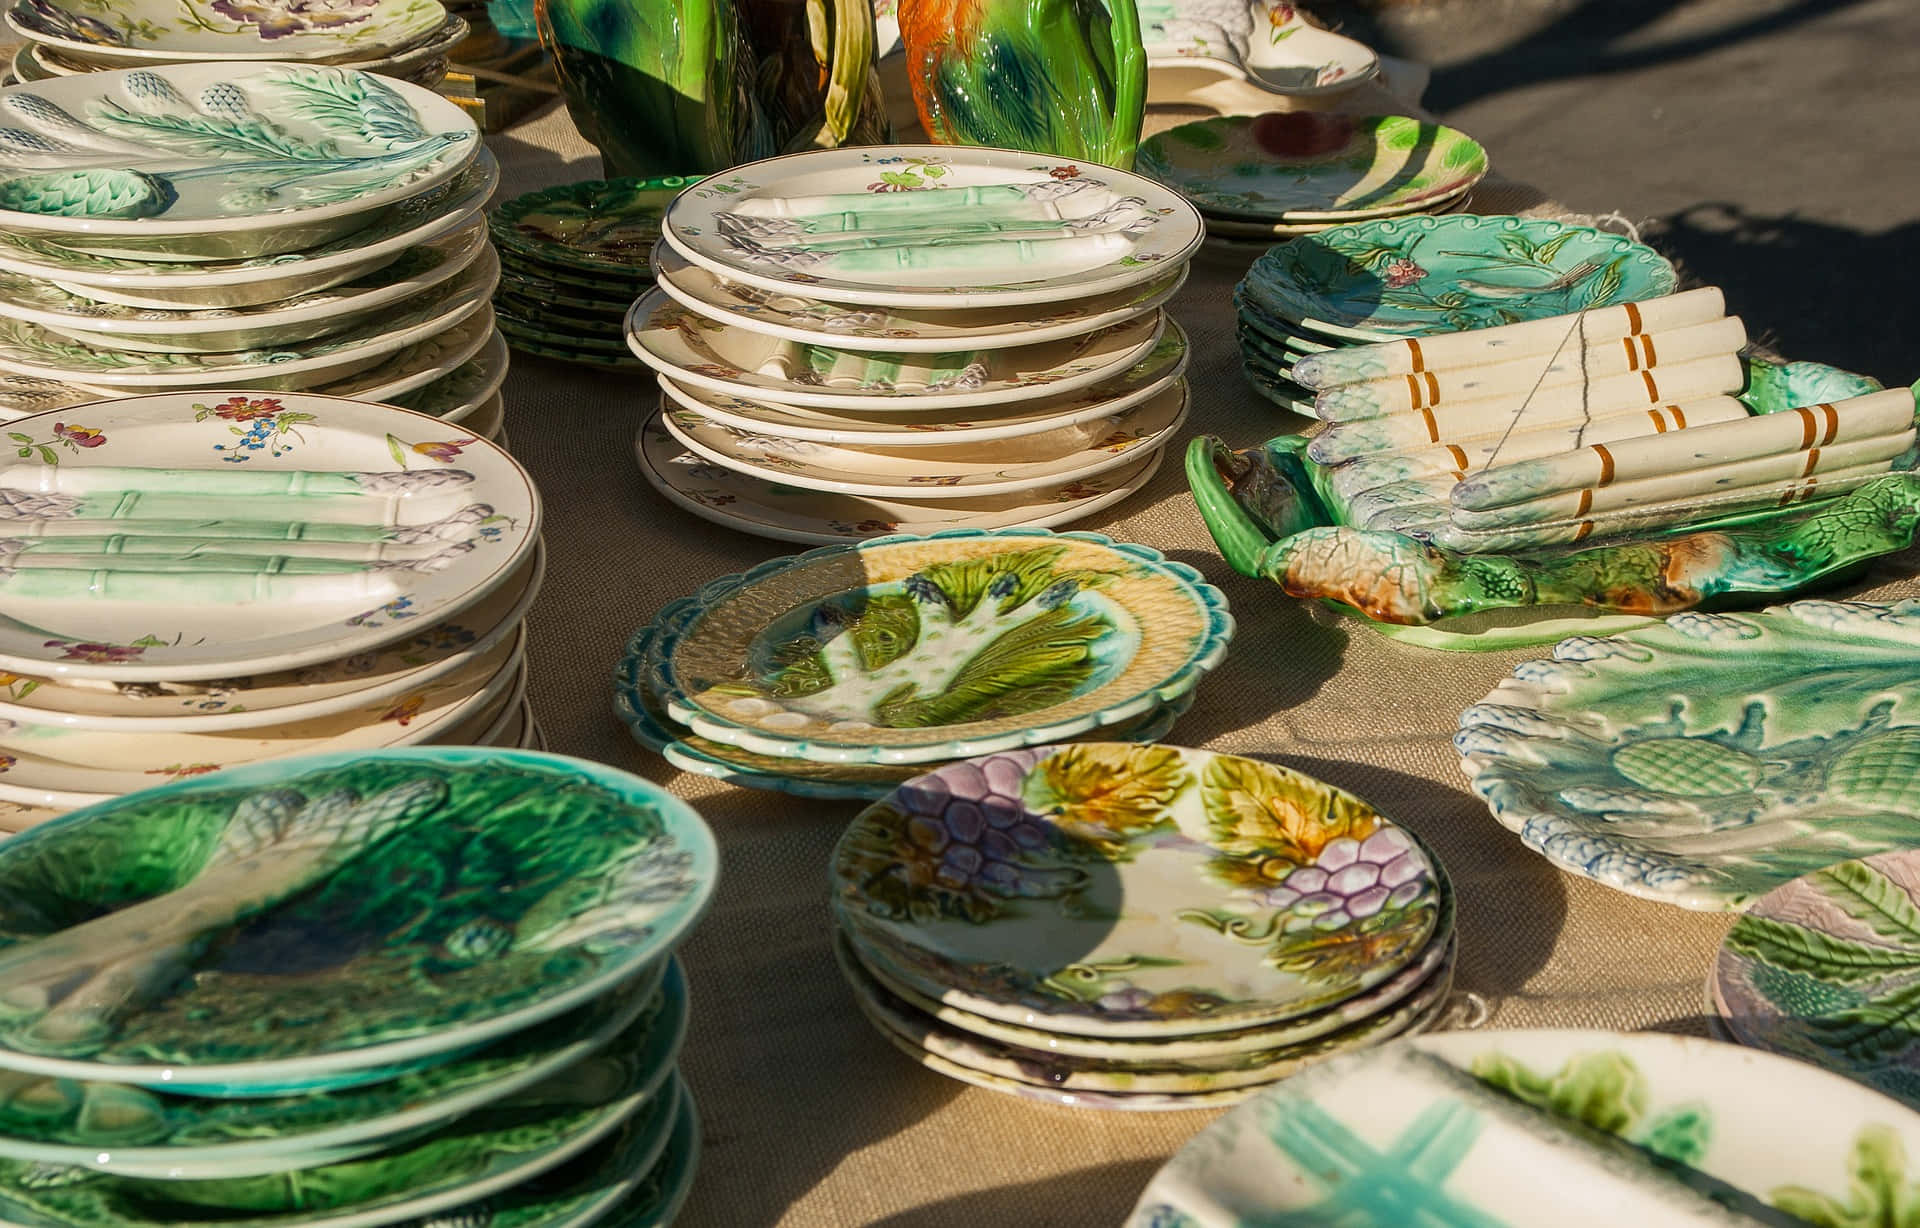 Flowery Plates Yard Sale Picture